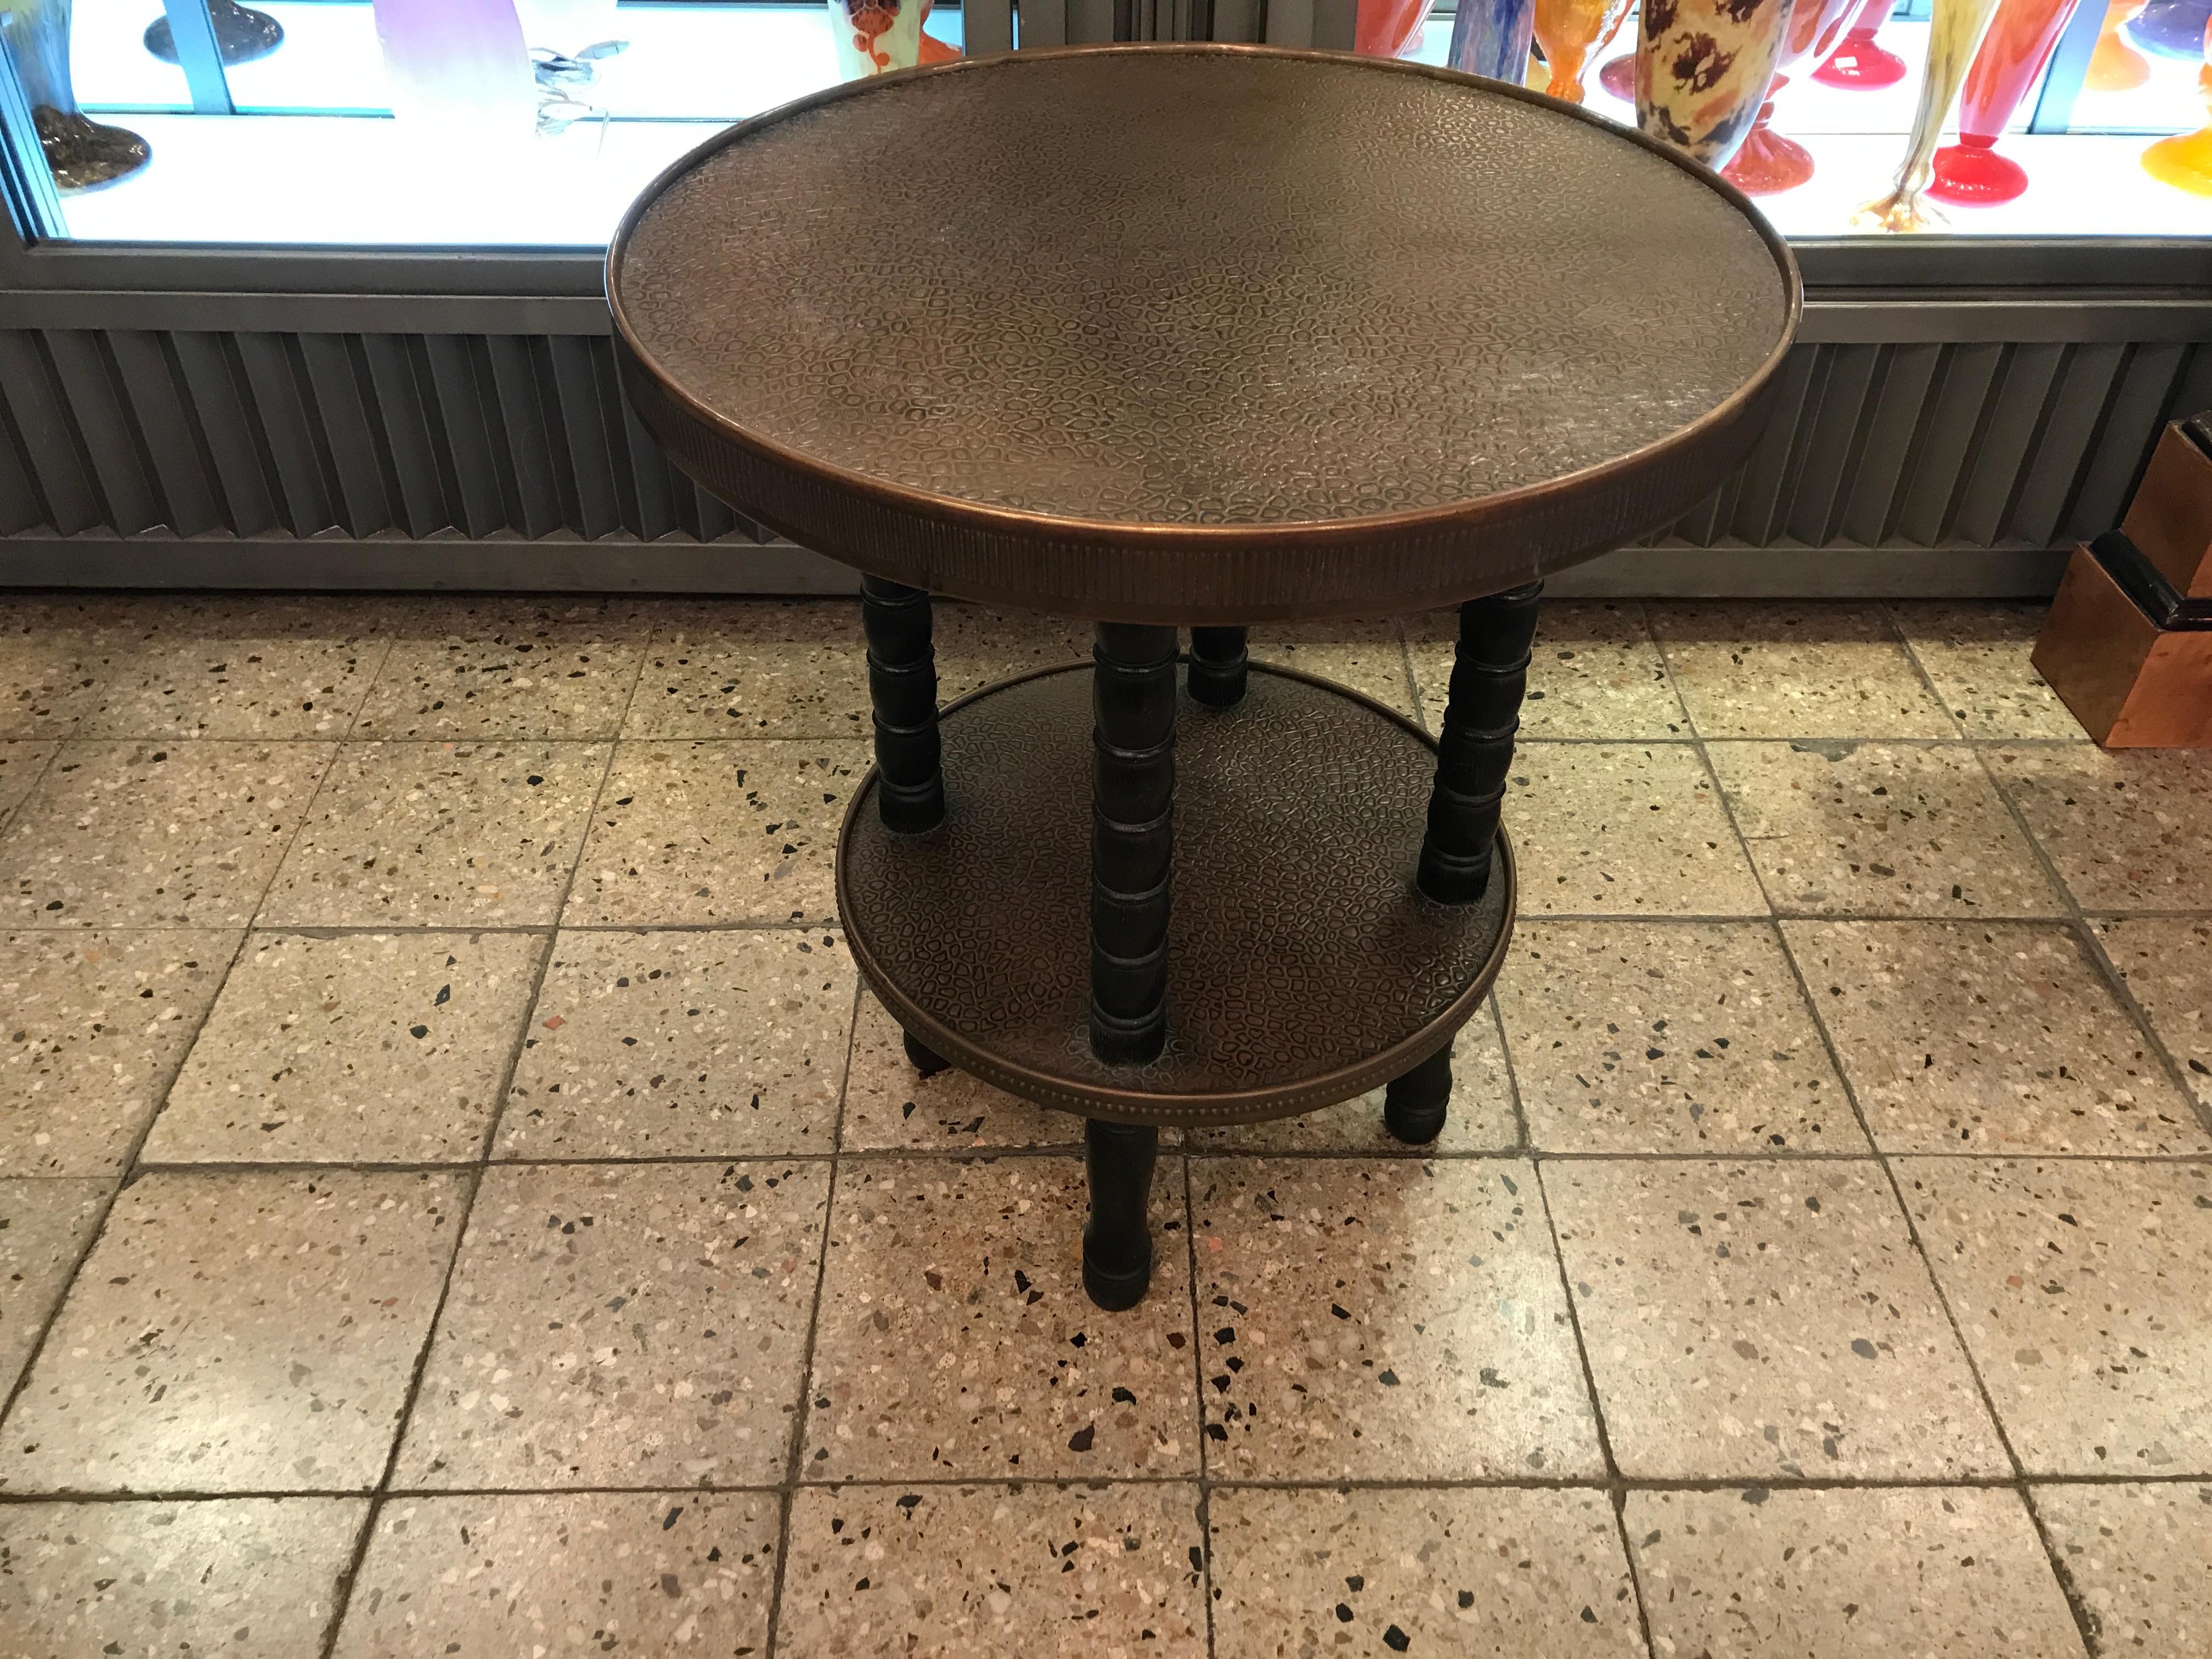 Table vienna Secession

Material: wood and bronze
Style: Vienna Secession
Country: Vienna
We have specialized in the sale of Art Deco and Art Nouveau and Vintage styles since 1982. If you have any questions we are at your disposal.
Pushing the